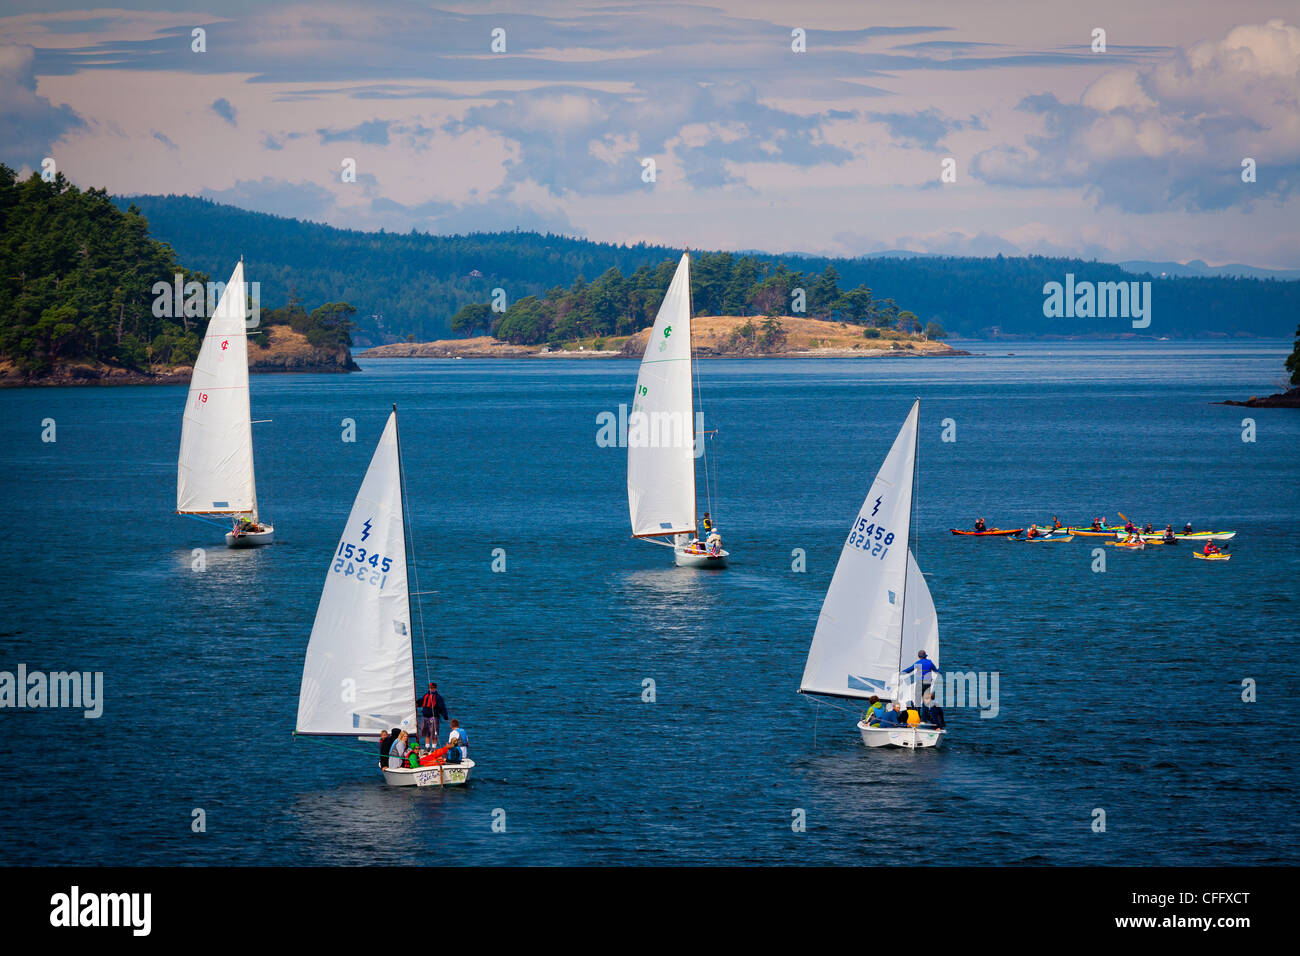 Sailboats and kayaks in the Puget Sound Stock Photo